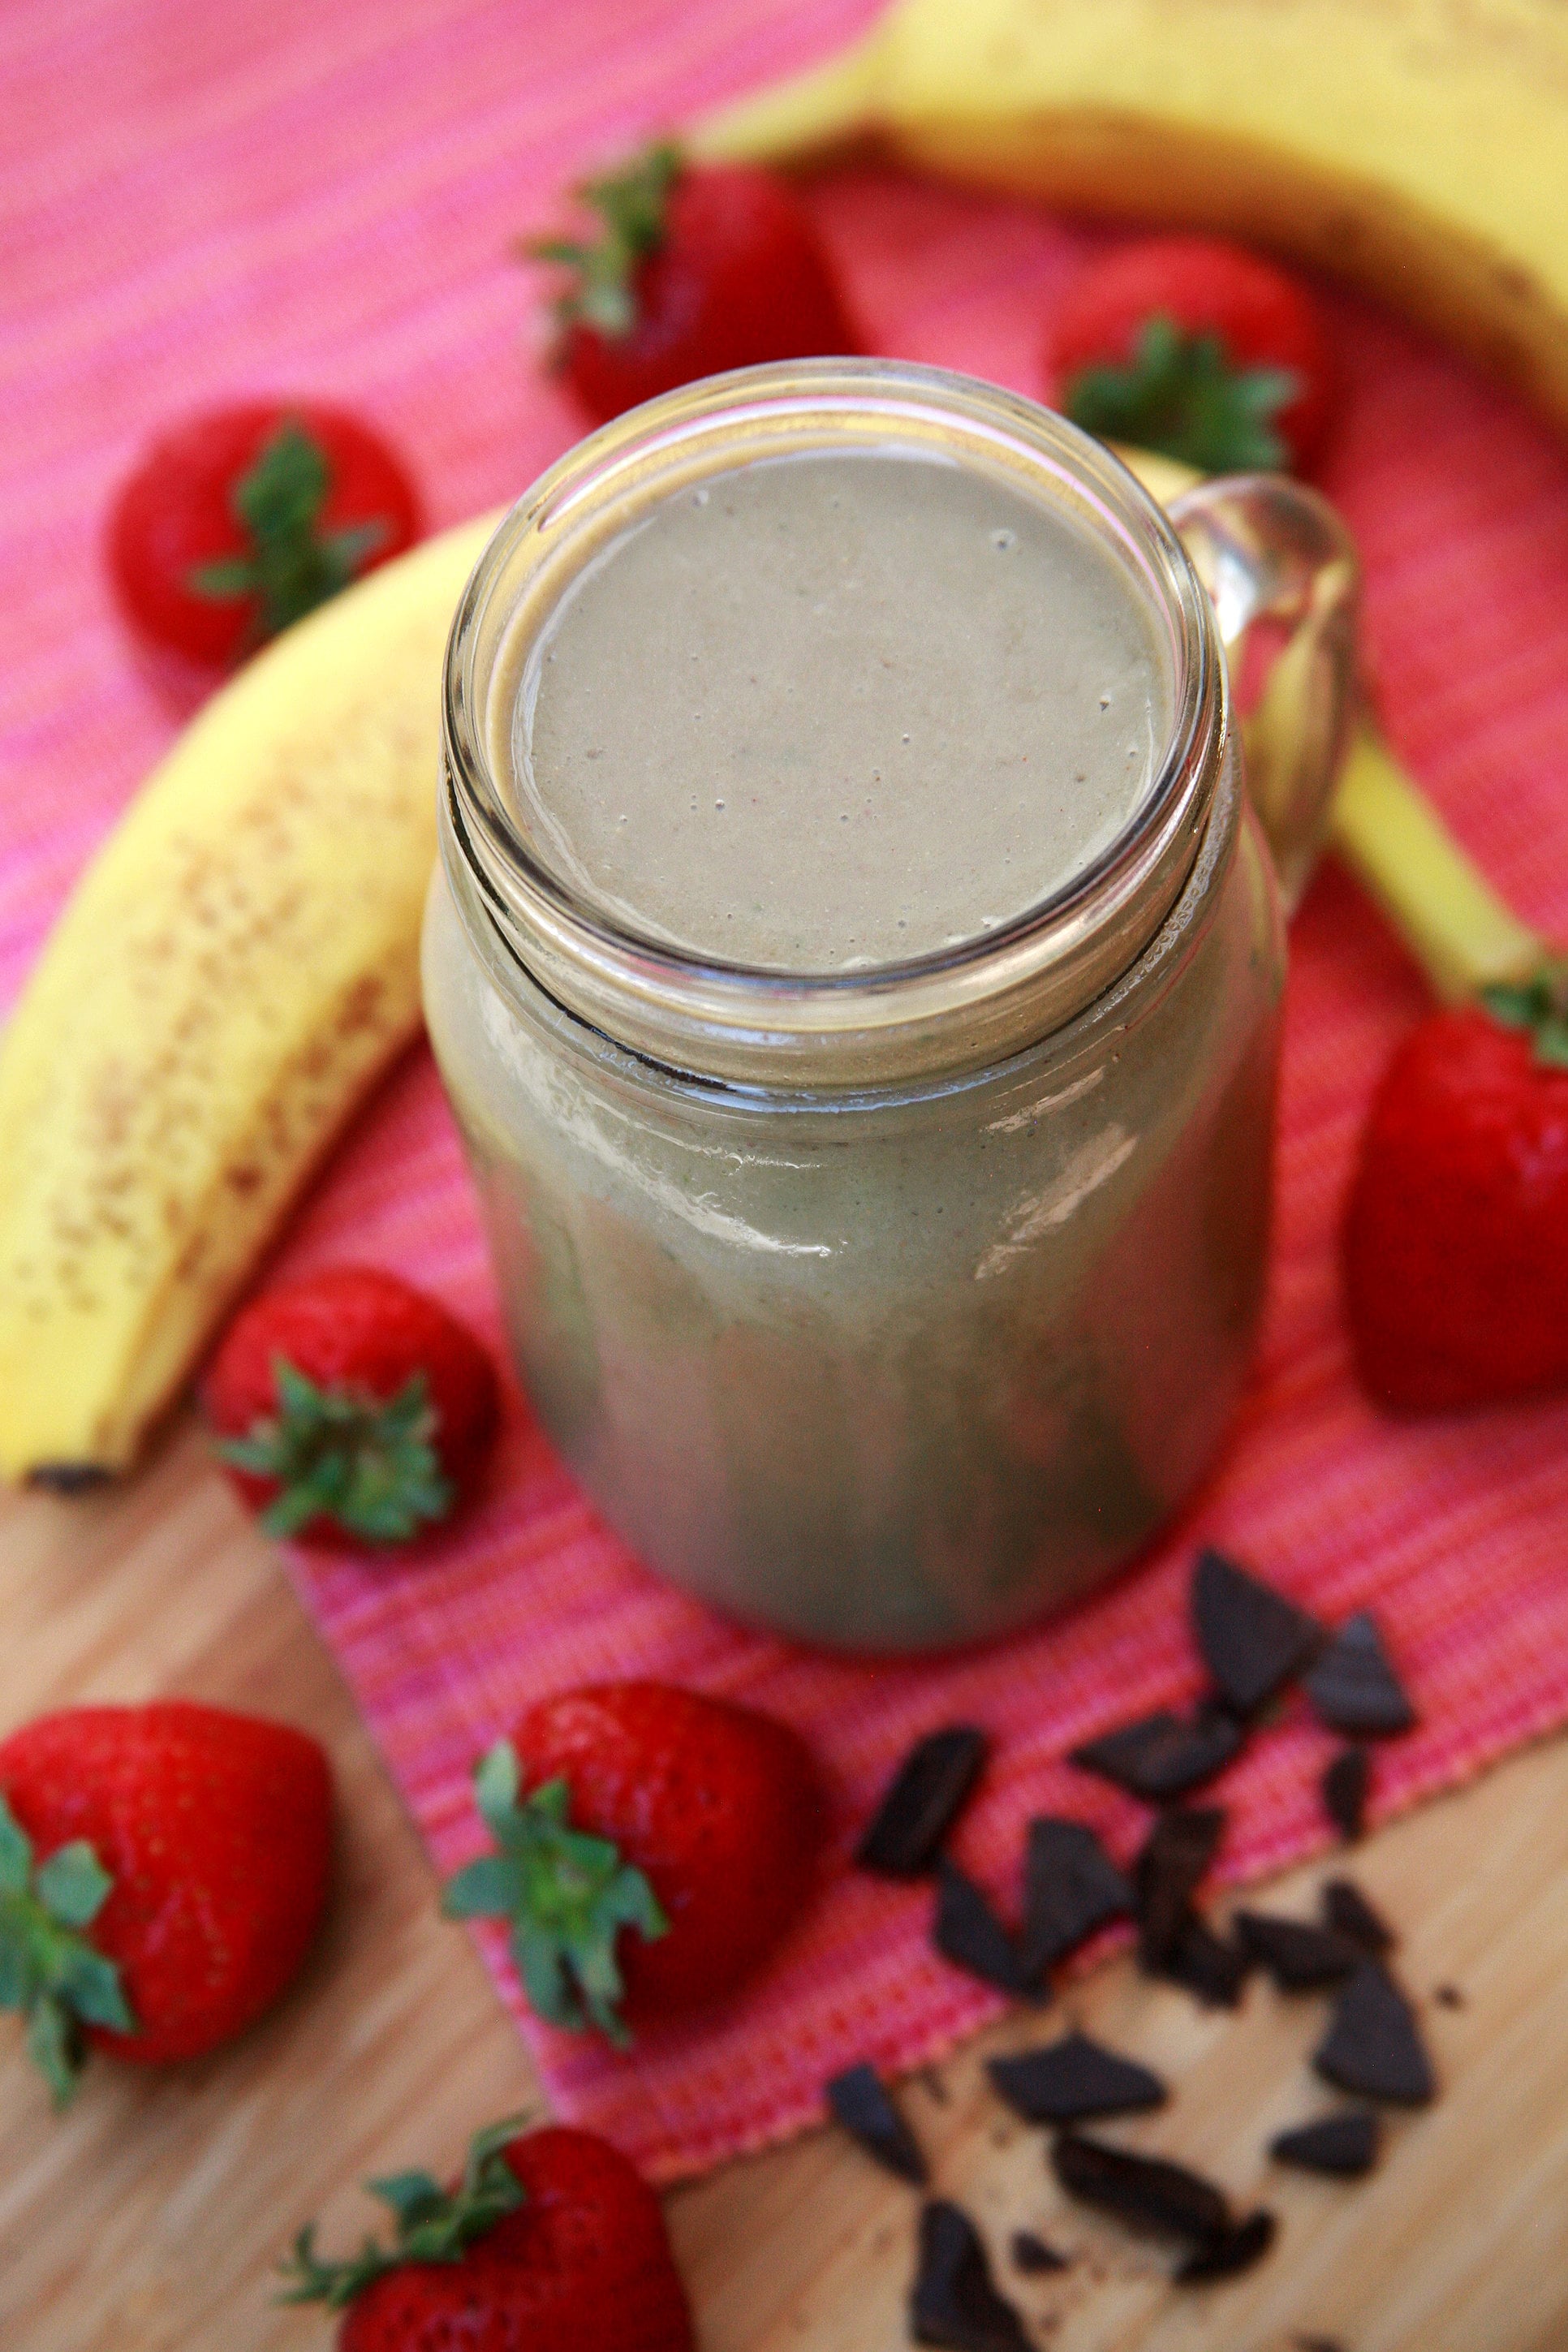 Sugar Free} Strawberry & Banana Smoothie & A 15 min Lower Body HIIT Workout  – Better with Cake